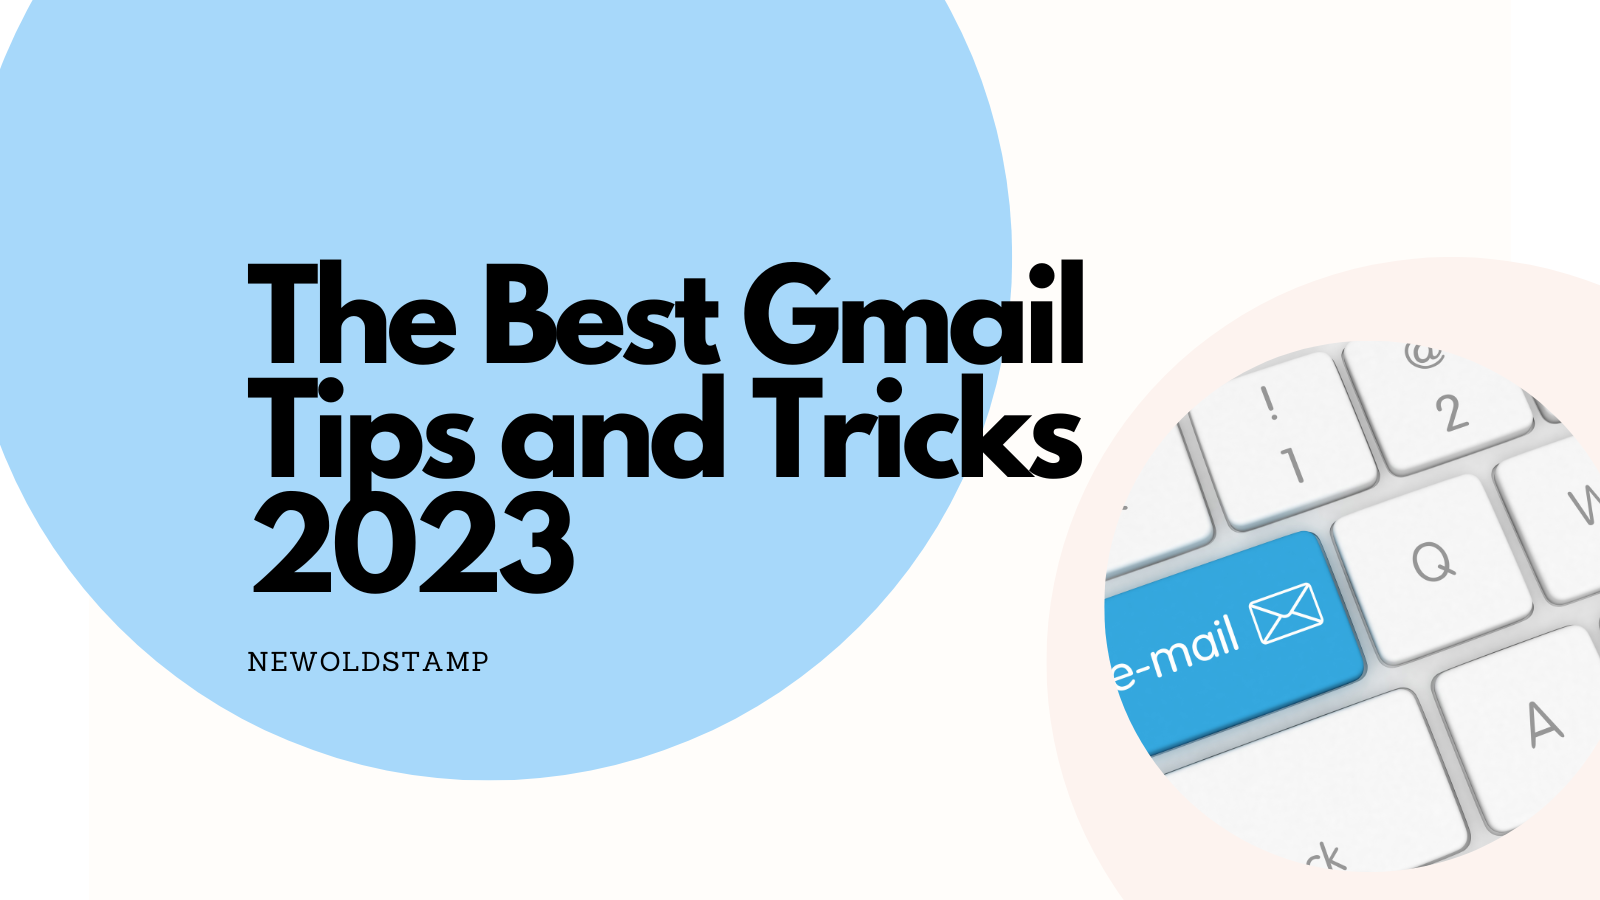 The Best Gmail Tips and Tricks 2023 - NEWOLDSTAMP